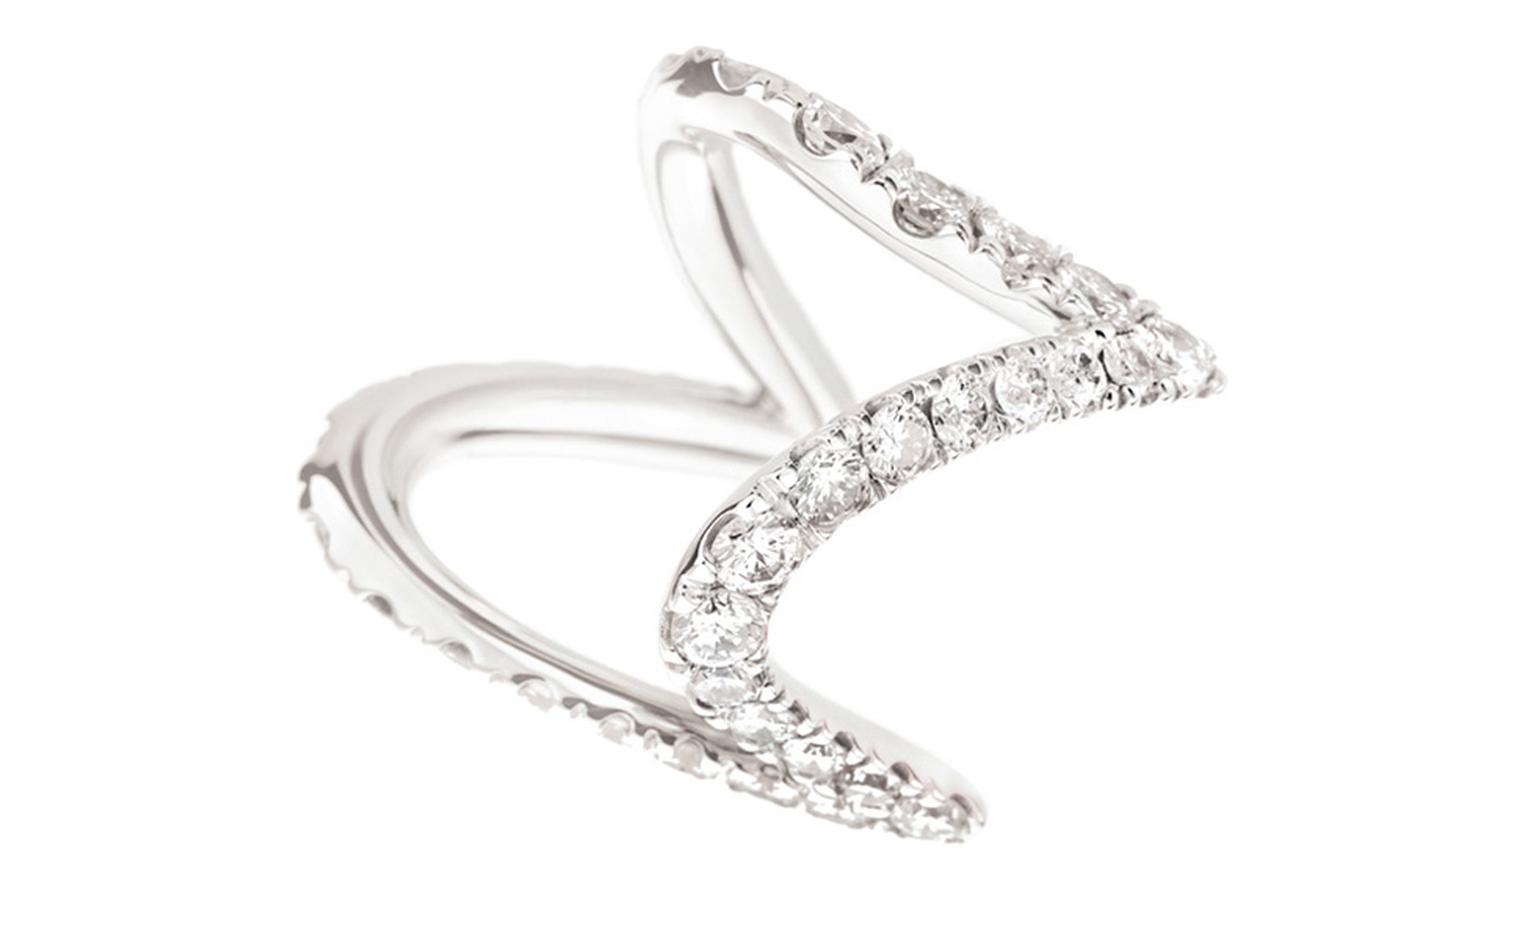 H STERN, PAMPULHA Ring in white gold and diamonds.